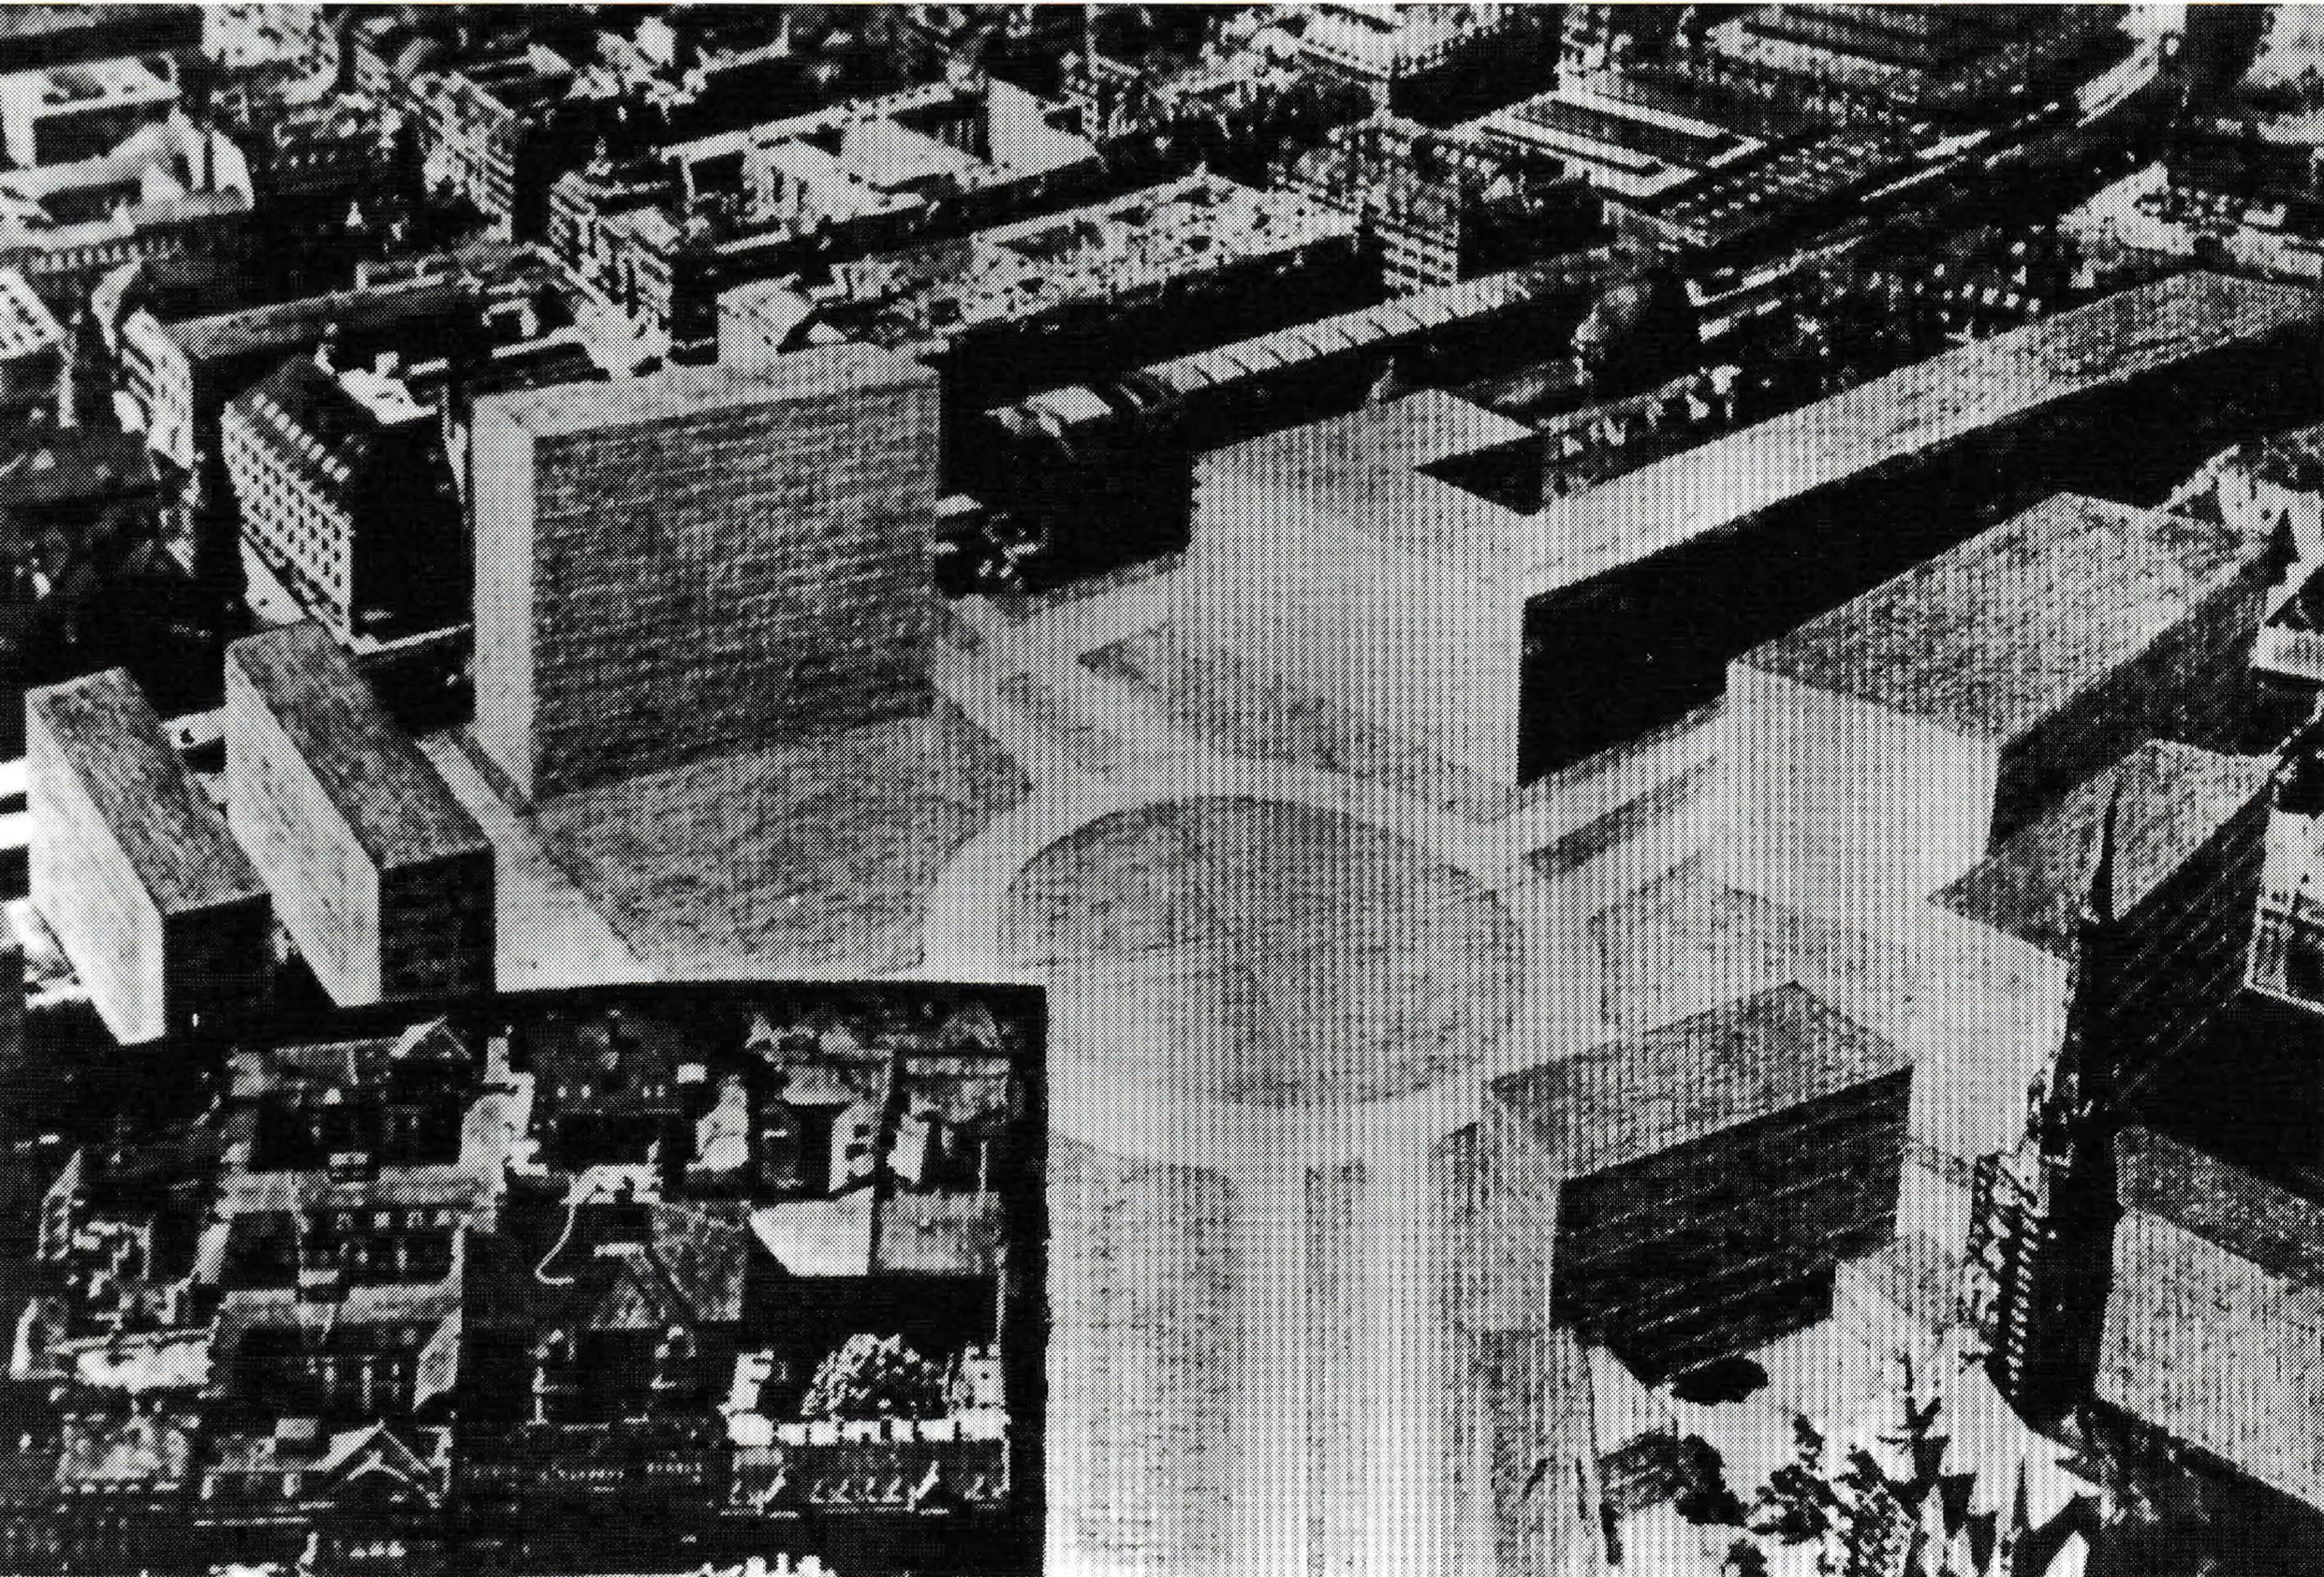 Image of architectural models